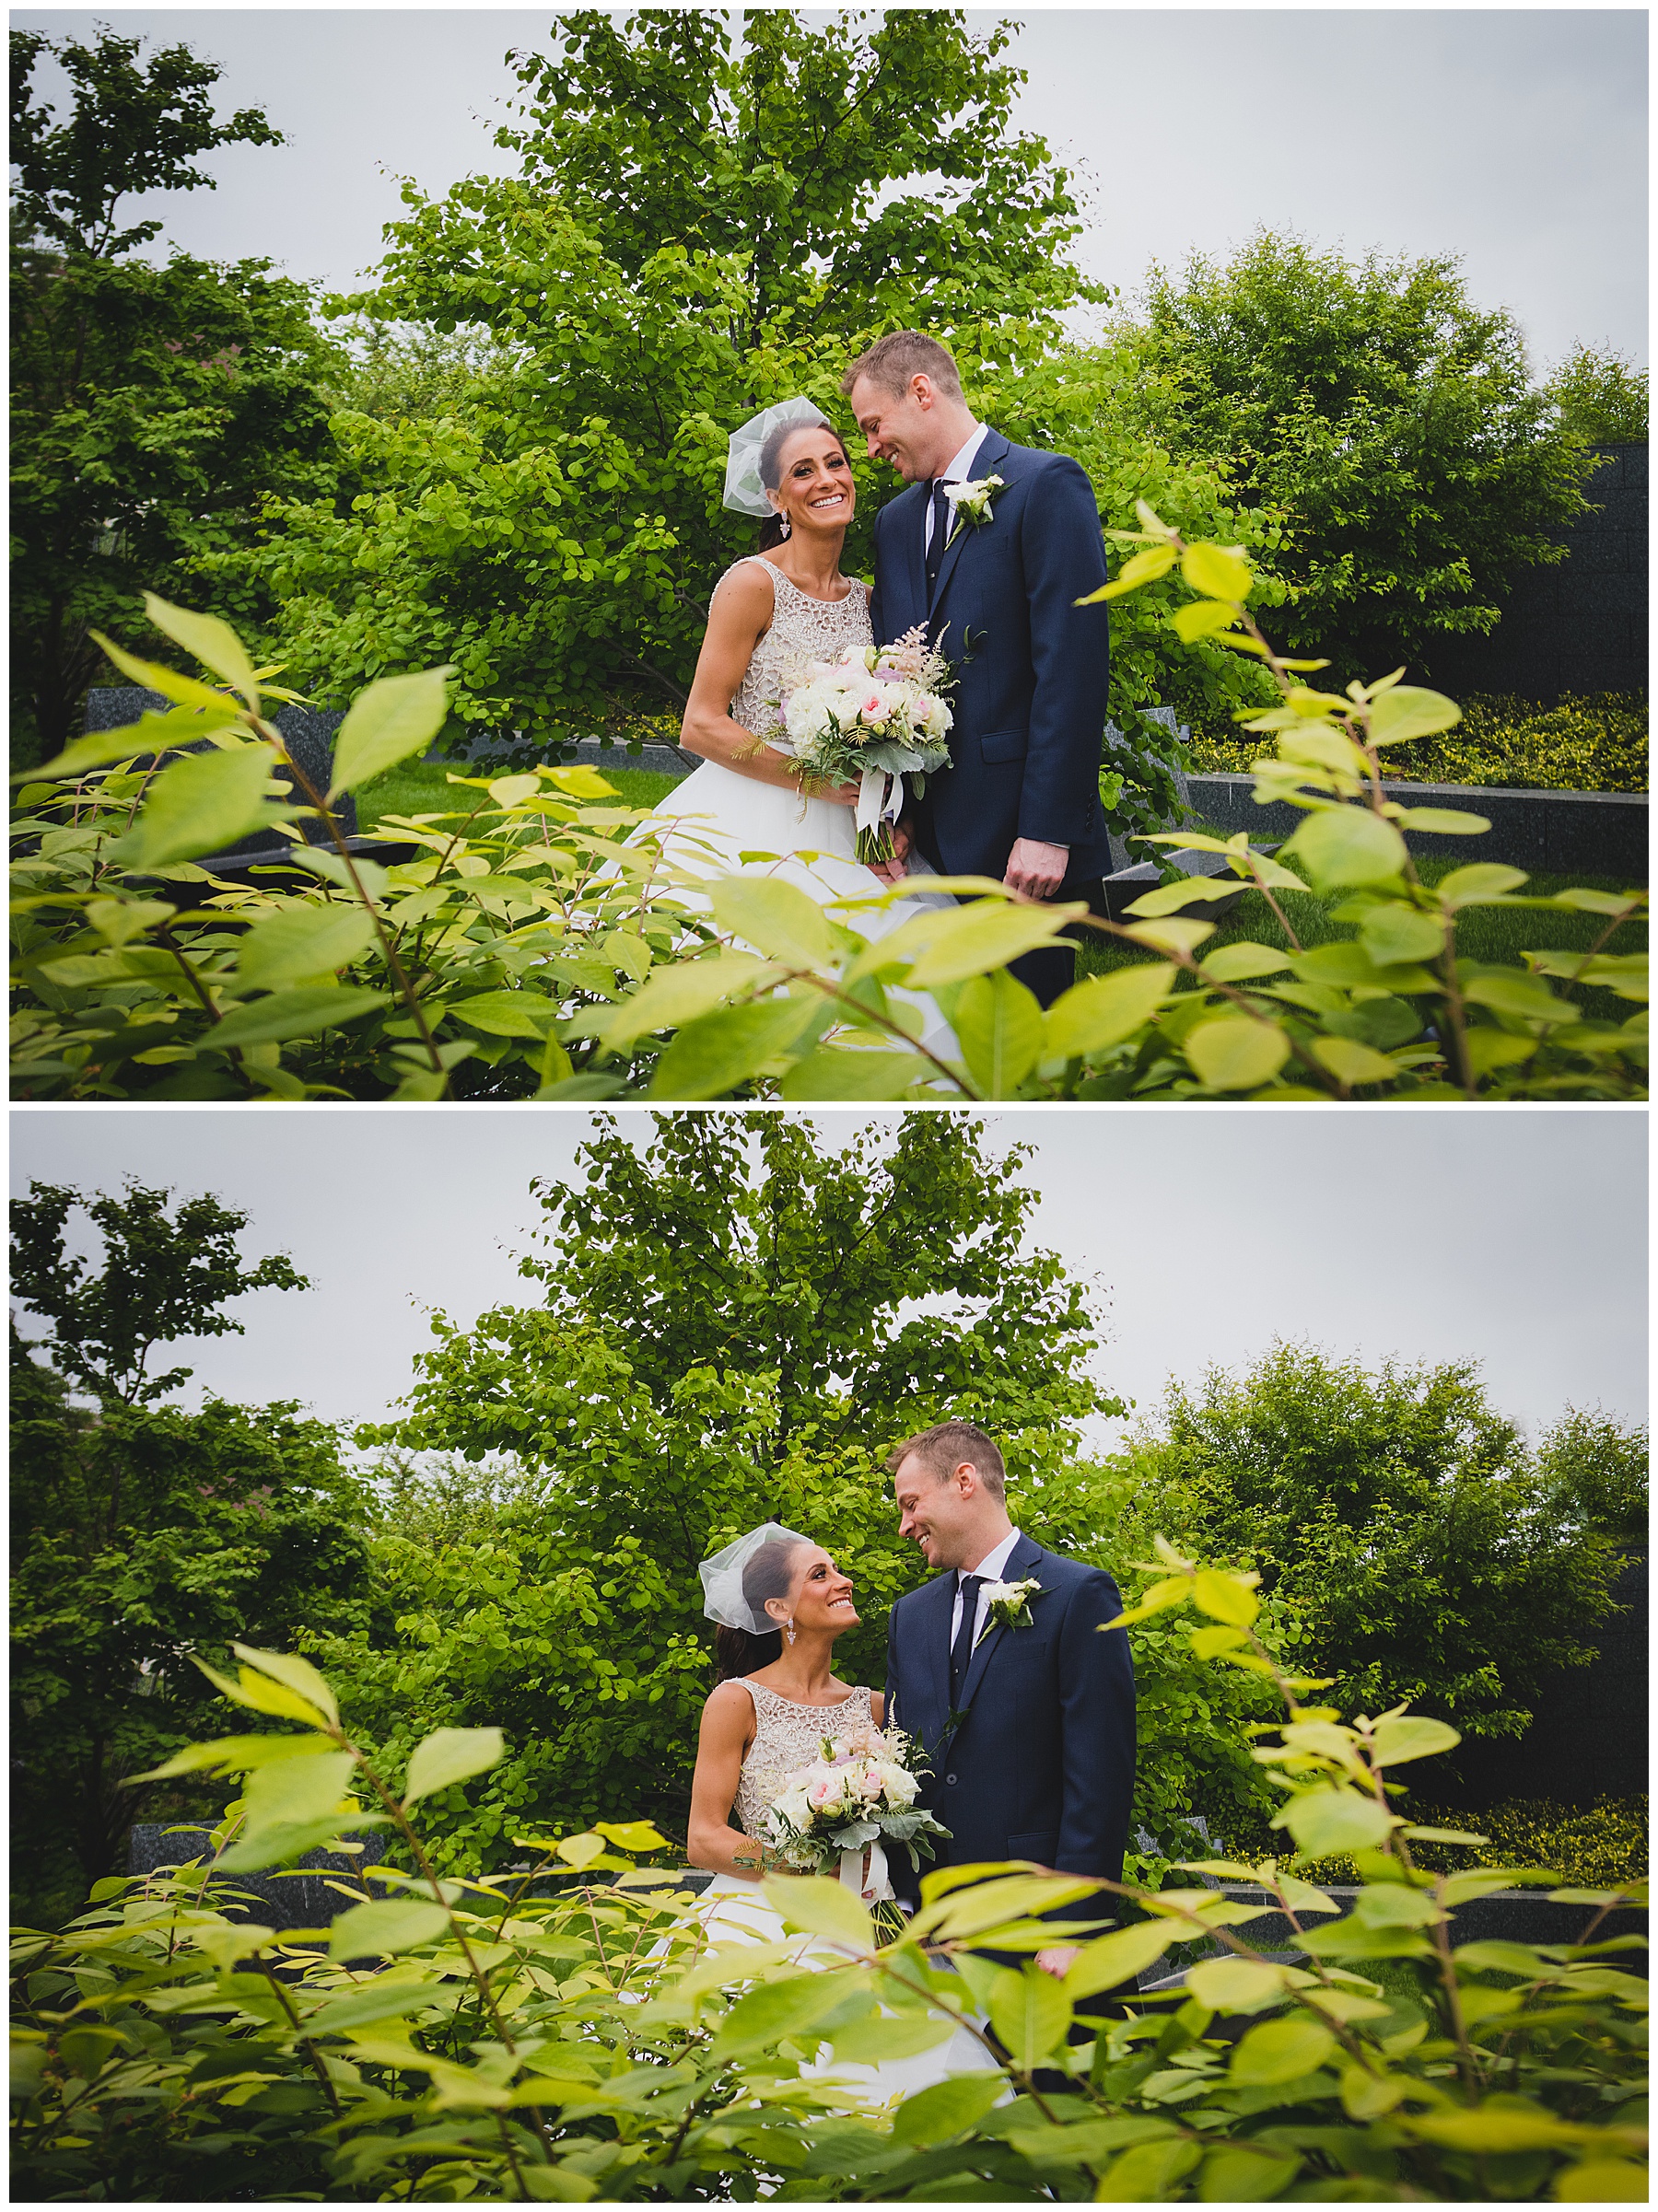 Bride and groom with green plants and Trees